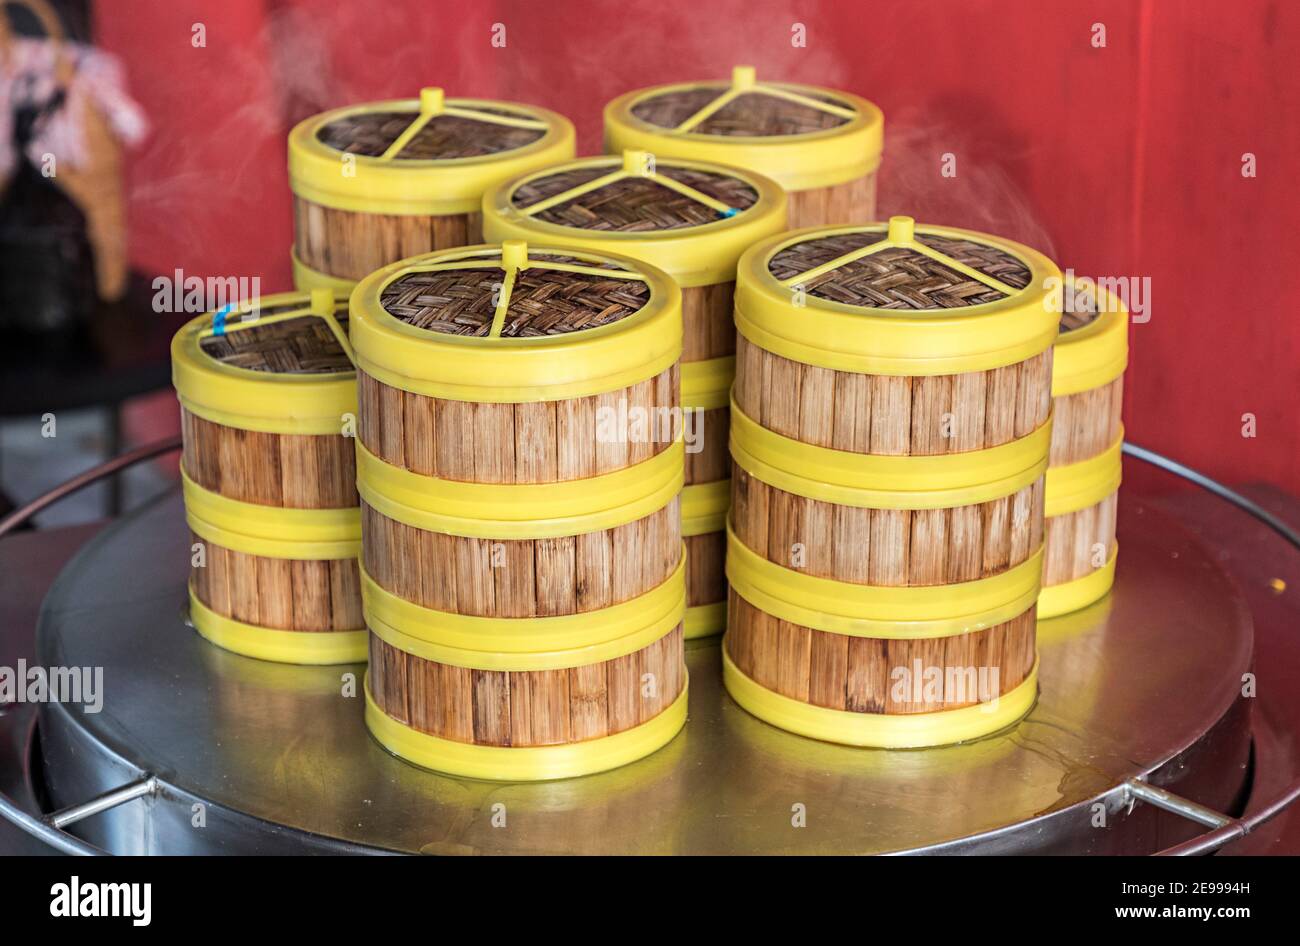 Hot steamed rice in bamboo containers at cafe, Miri, Sarawak, Malaysia Stock Photo